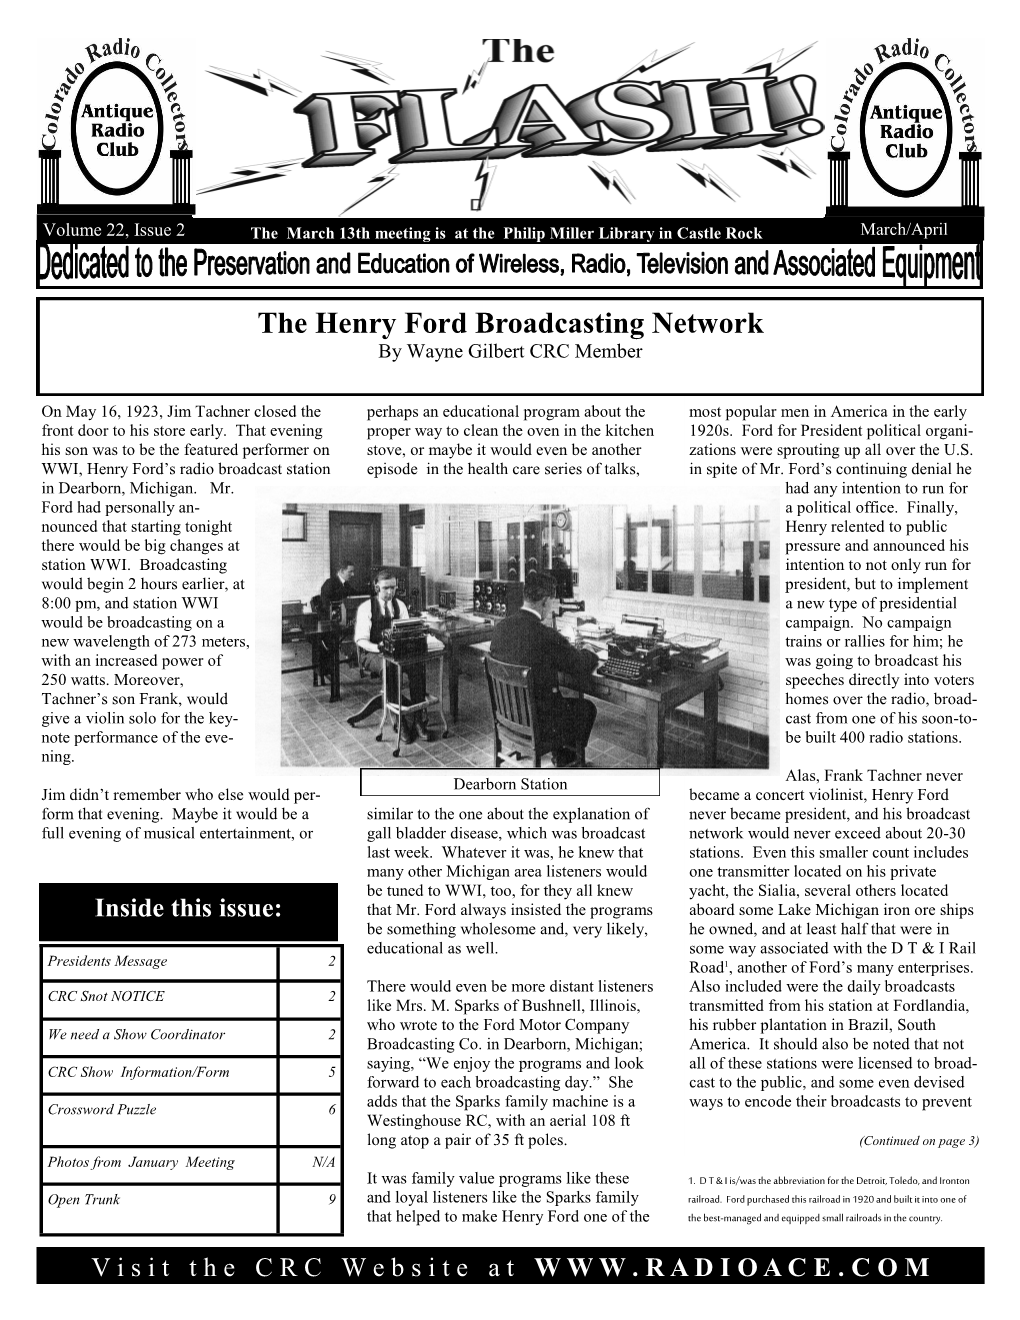 The Henry Ford Broadcasting Network by Wayne Gilbert CRC Member